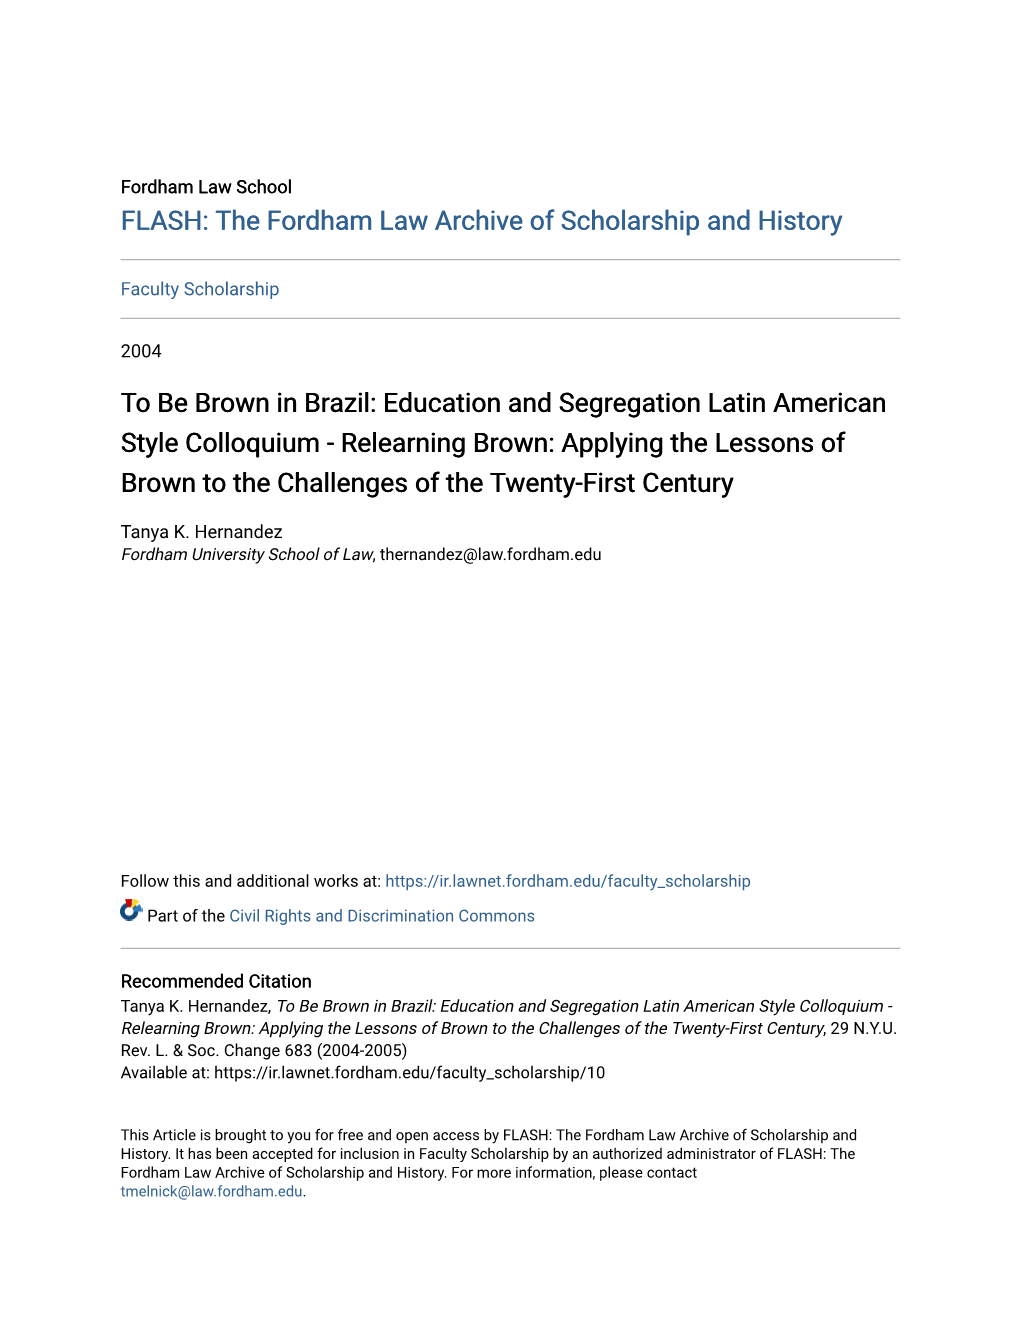 To Be Brown in Brazil: Education and Segregation Latin American Style Colloquium